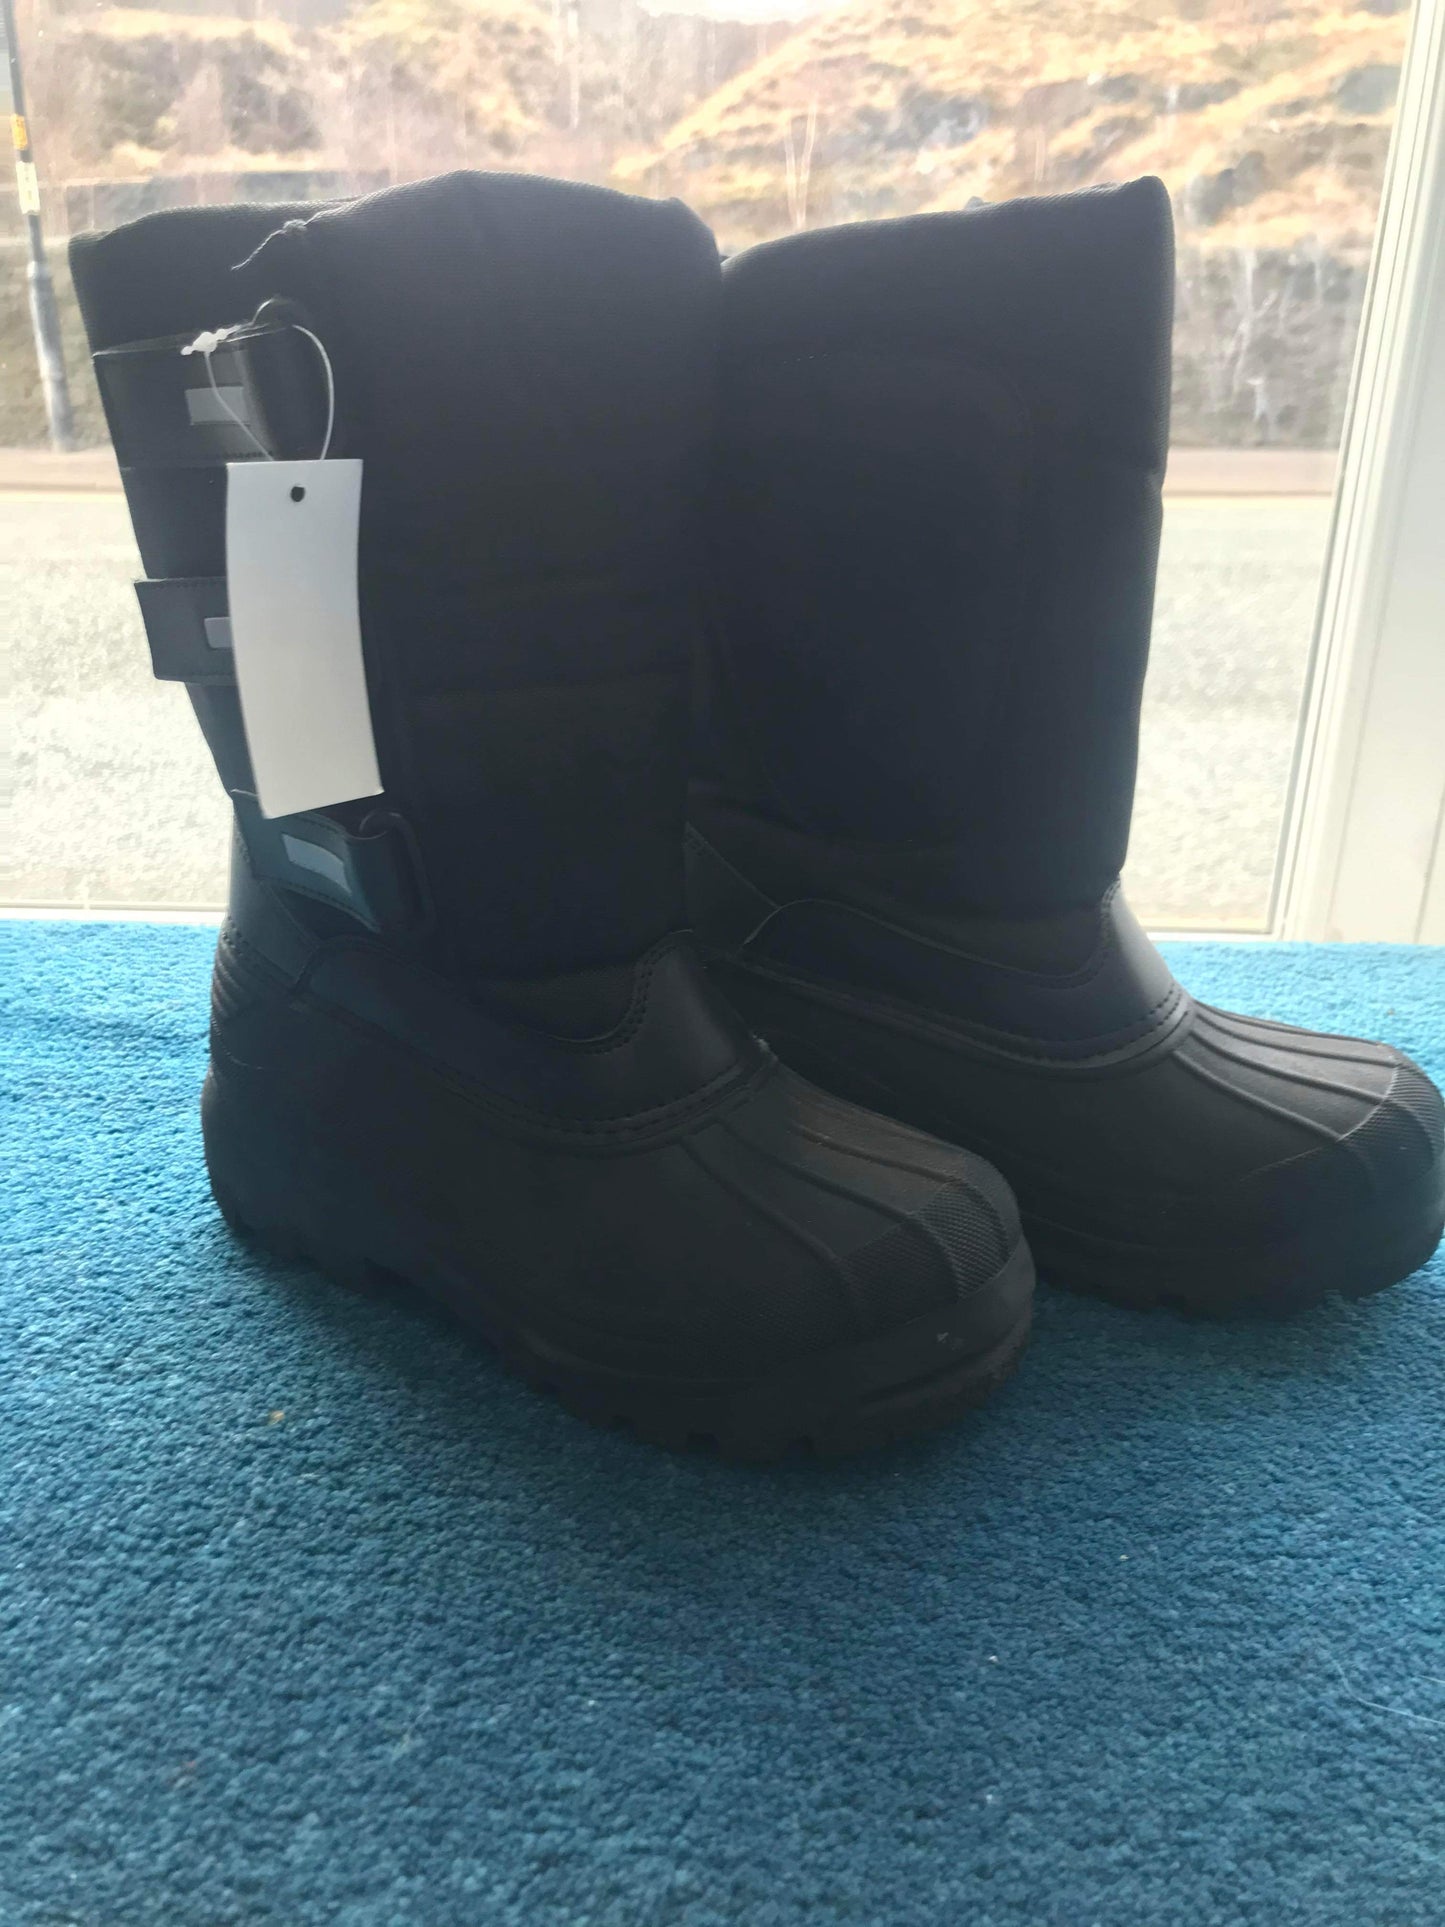 New childrens long muck boots fleece lined FREE POSTAGE🟢